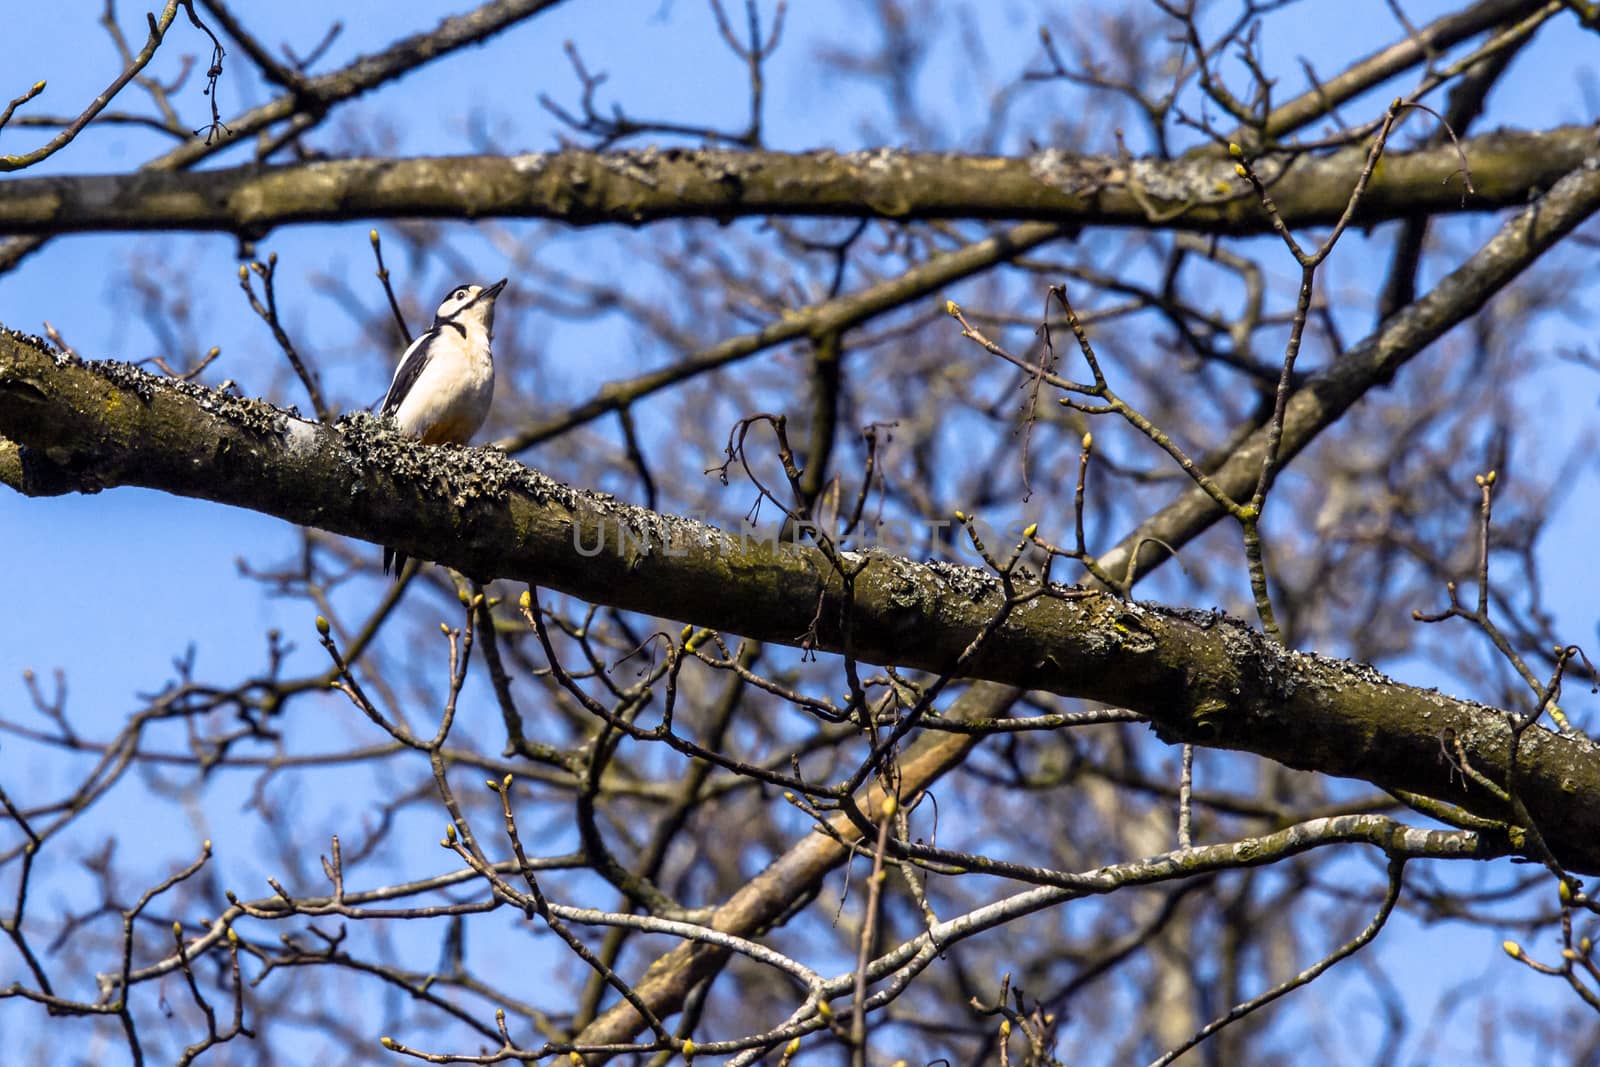 Woodpecker sitting on a branch in a tree by Sportactive